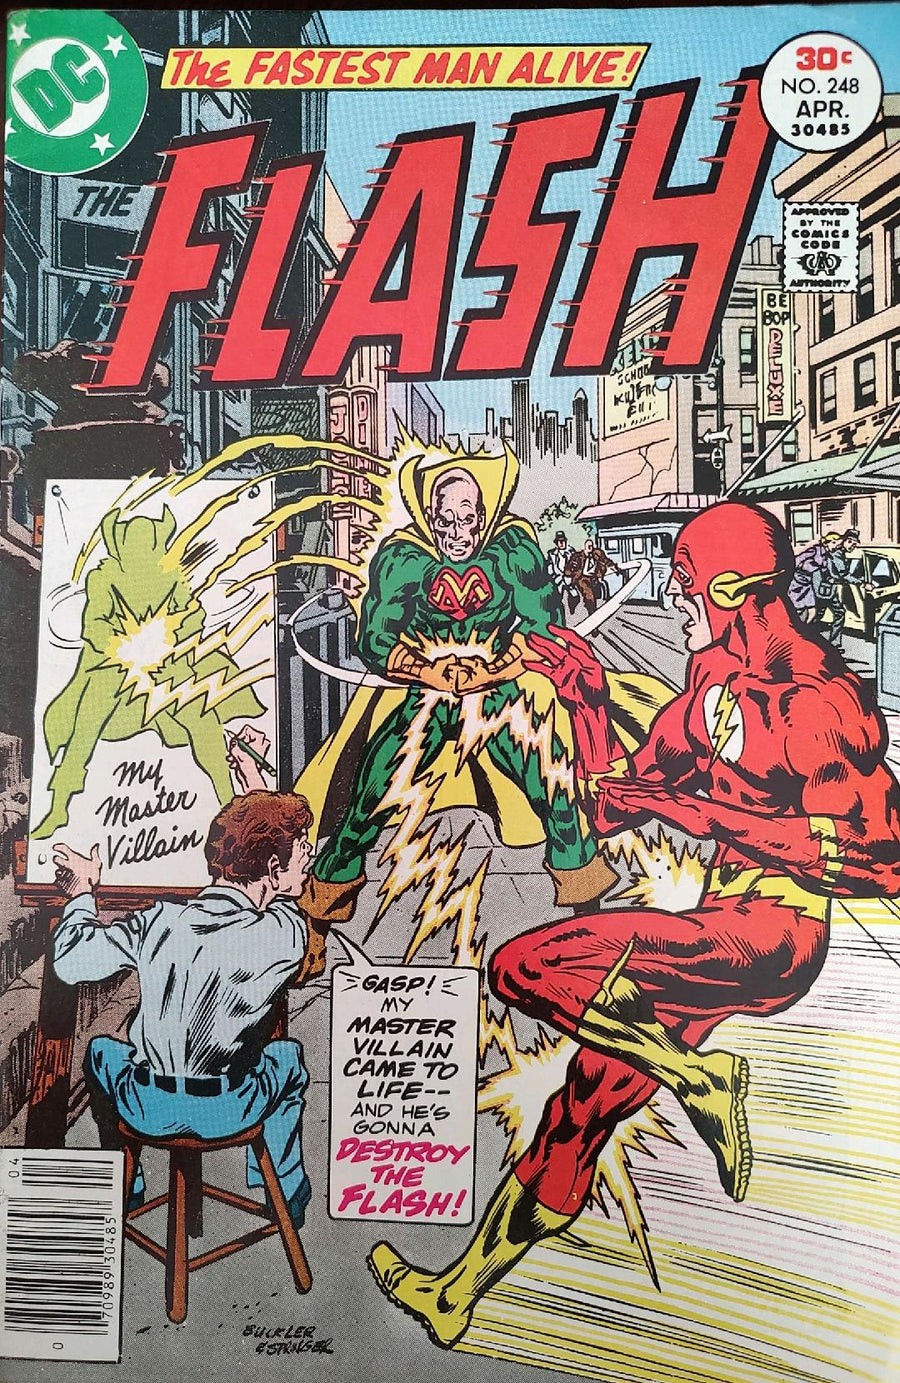 The Flash #248 Comic Book Cover